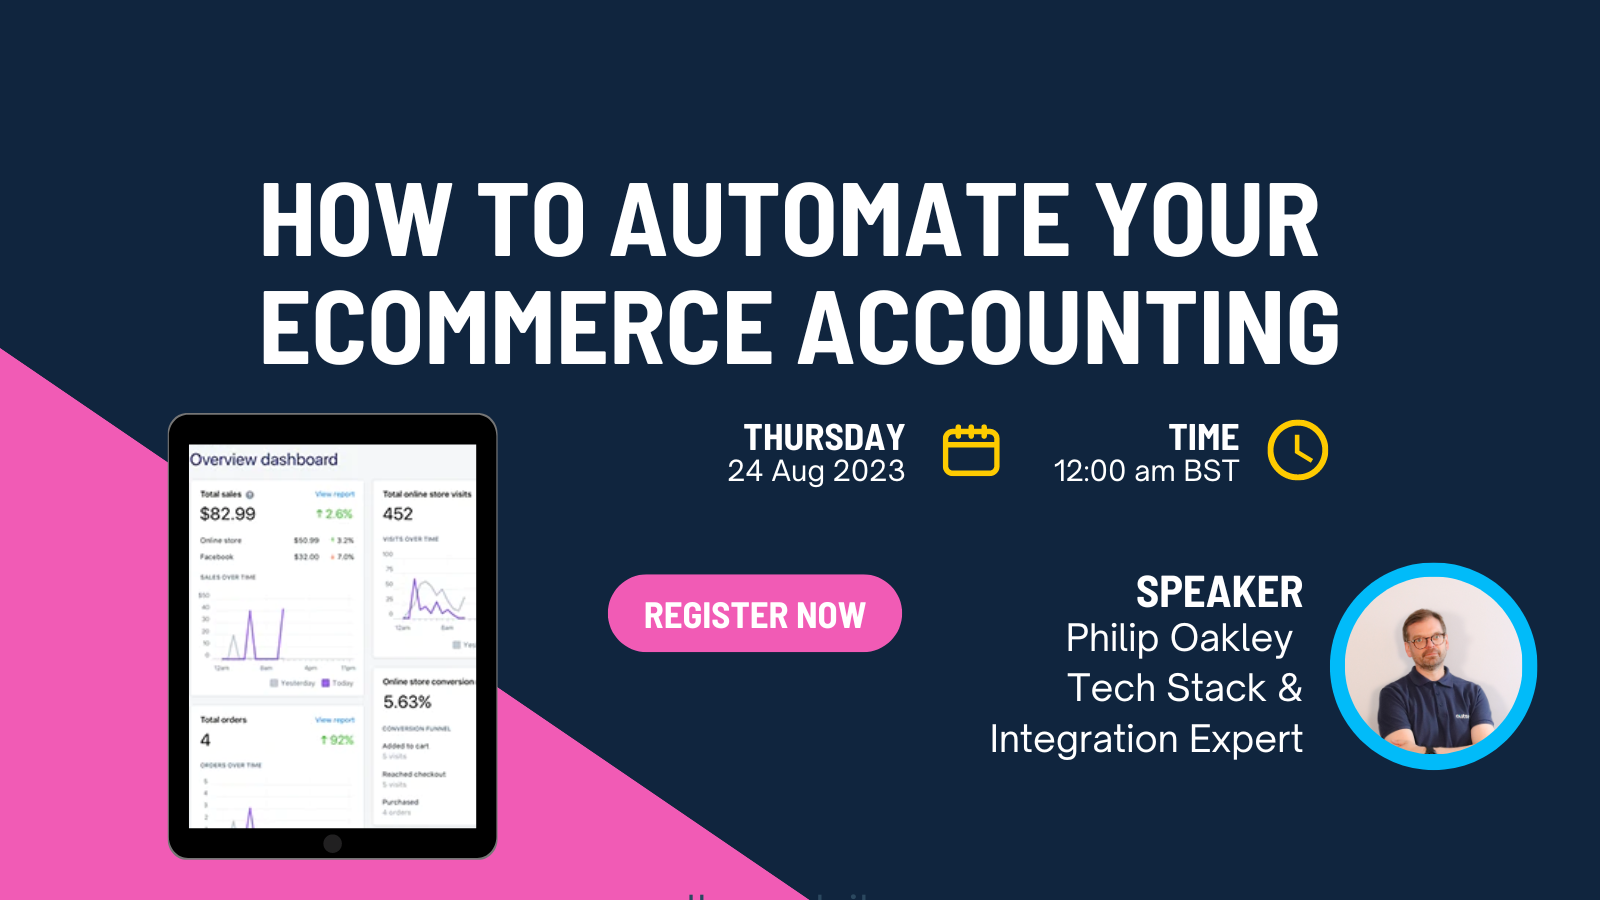 Webinar: How to Automate Your Ecommerce Accounting